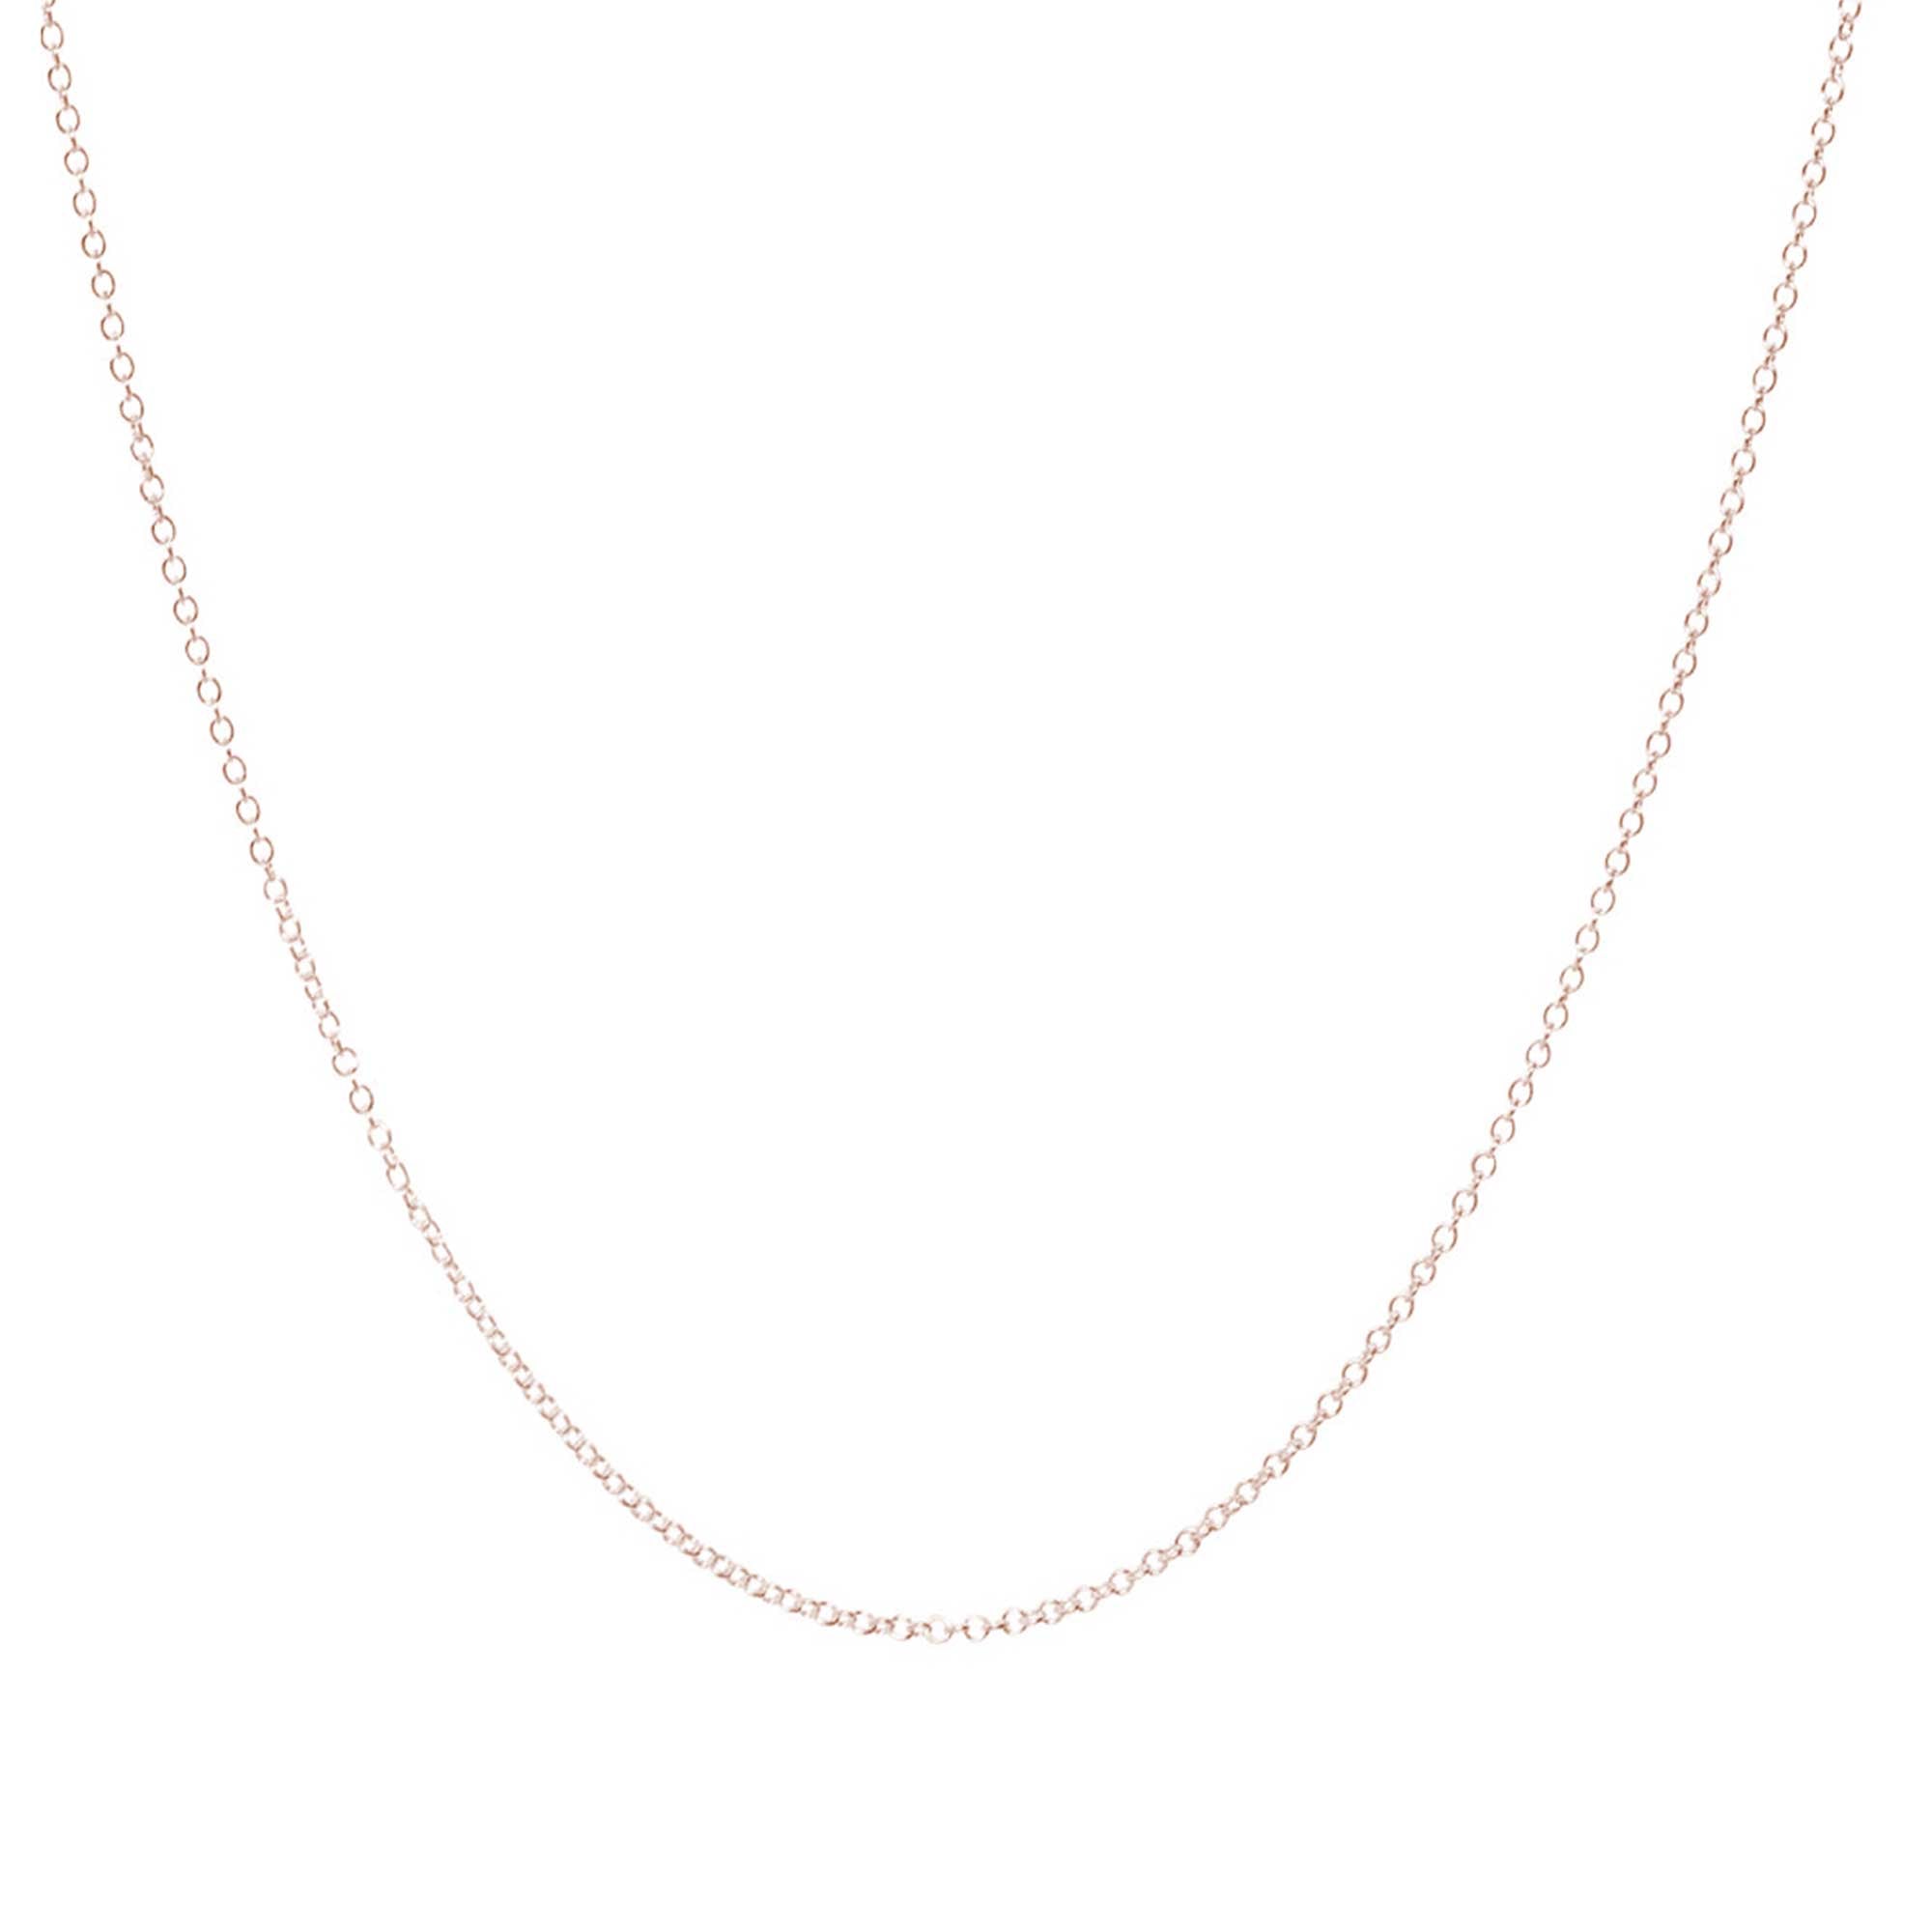 solid rose gold delicate plain necklace chain Scarlett Jewellery